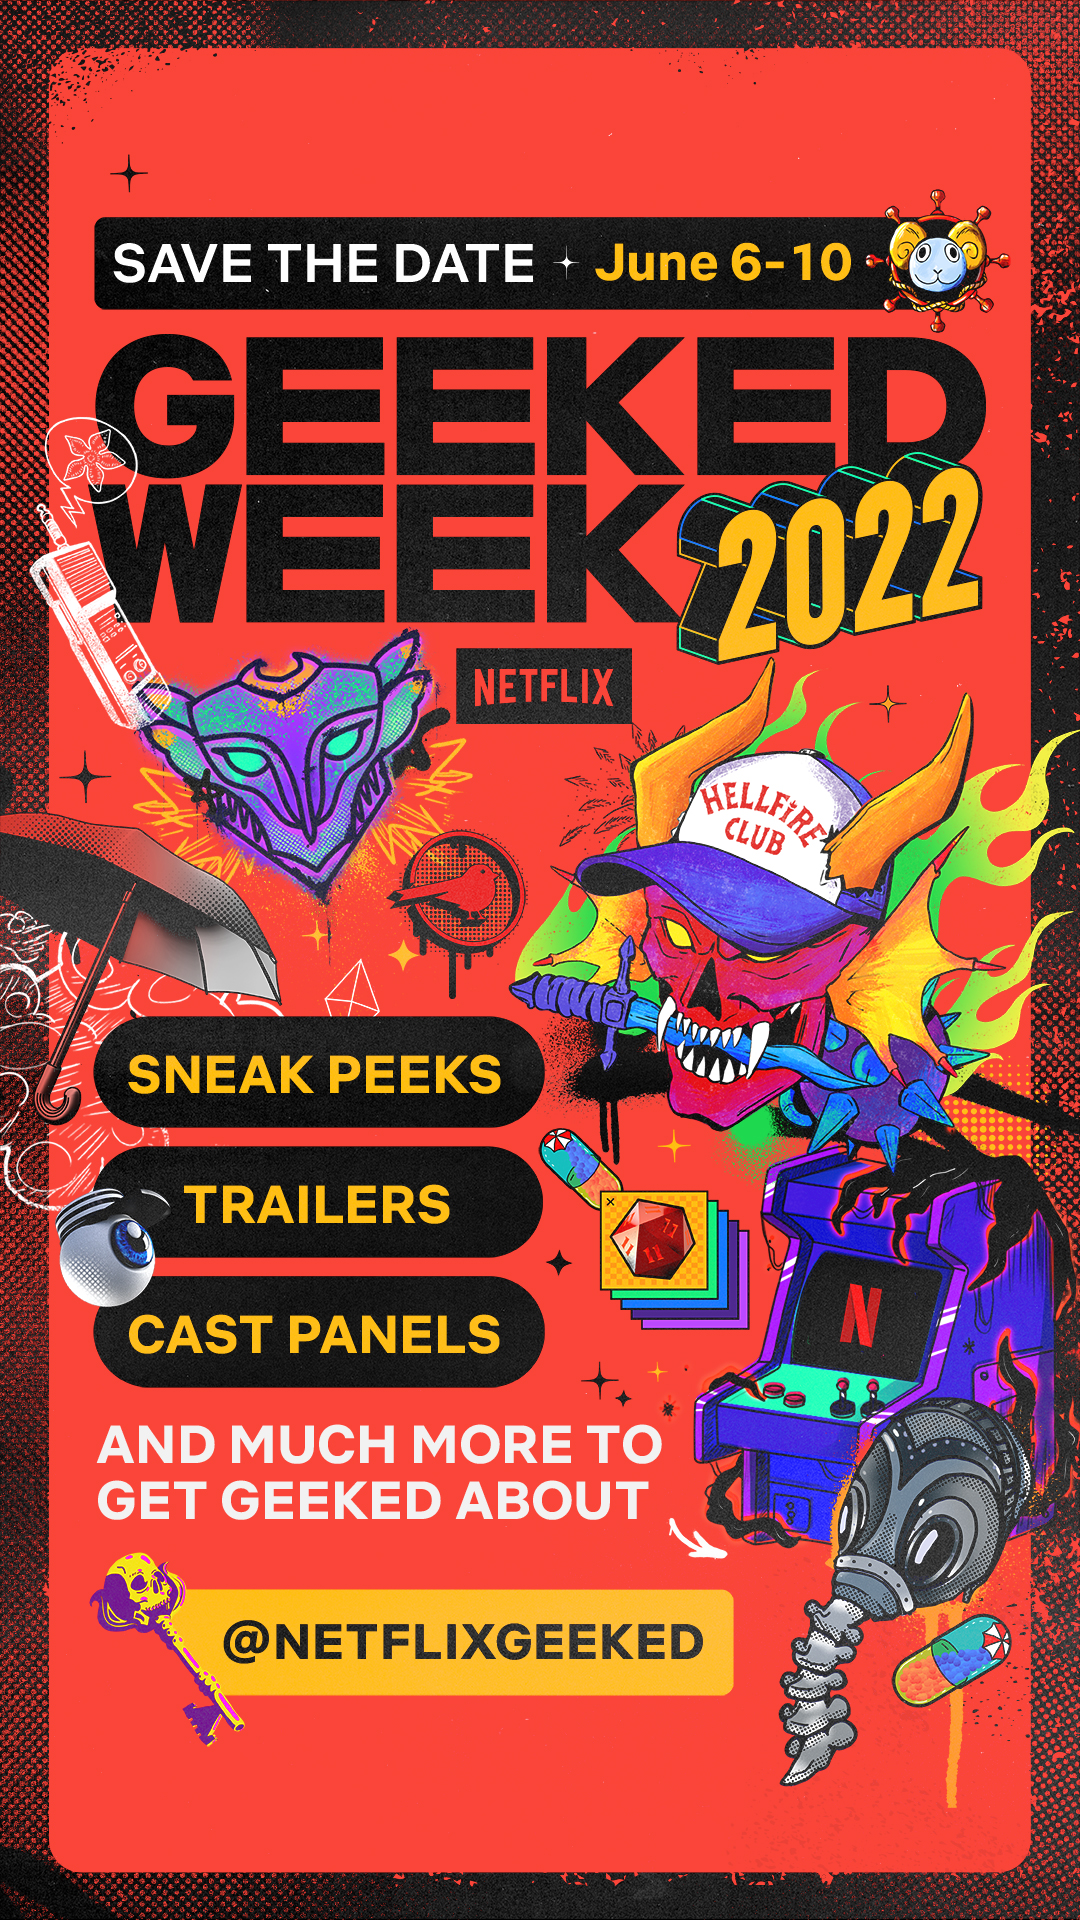 Geeked Week 2022 Save the Date